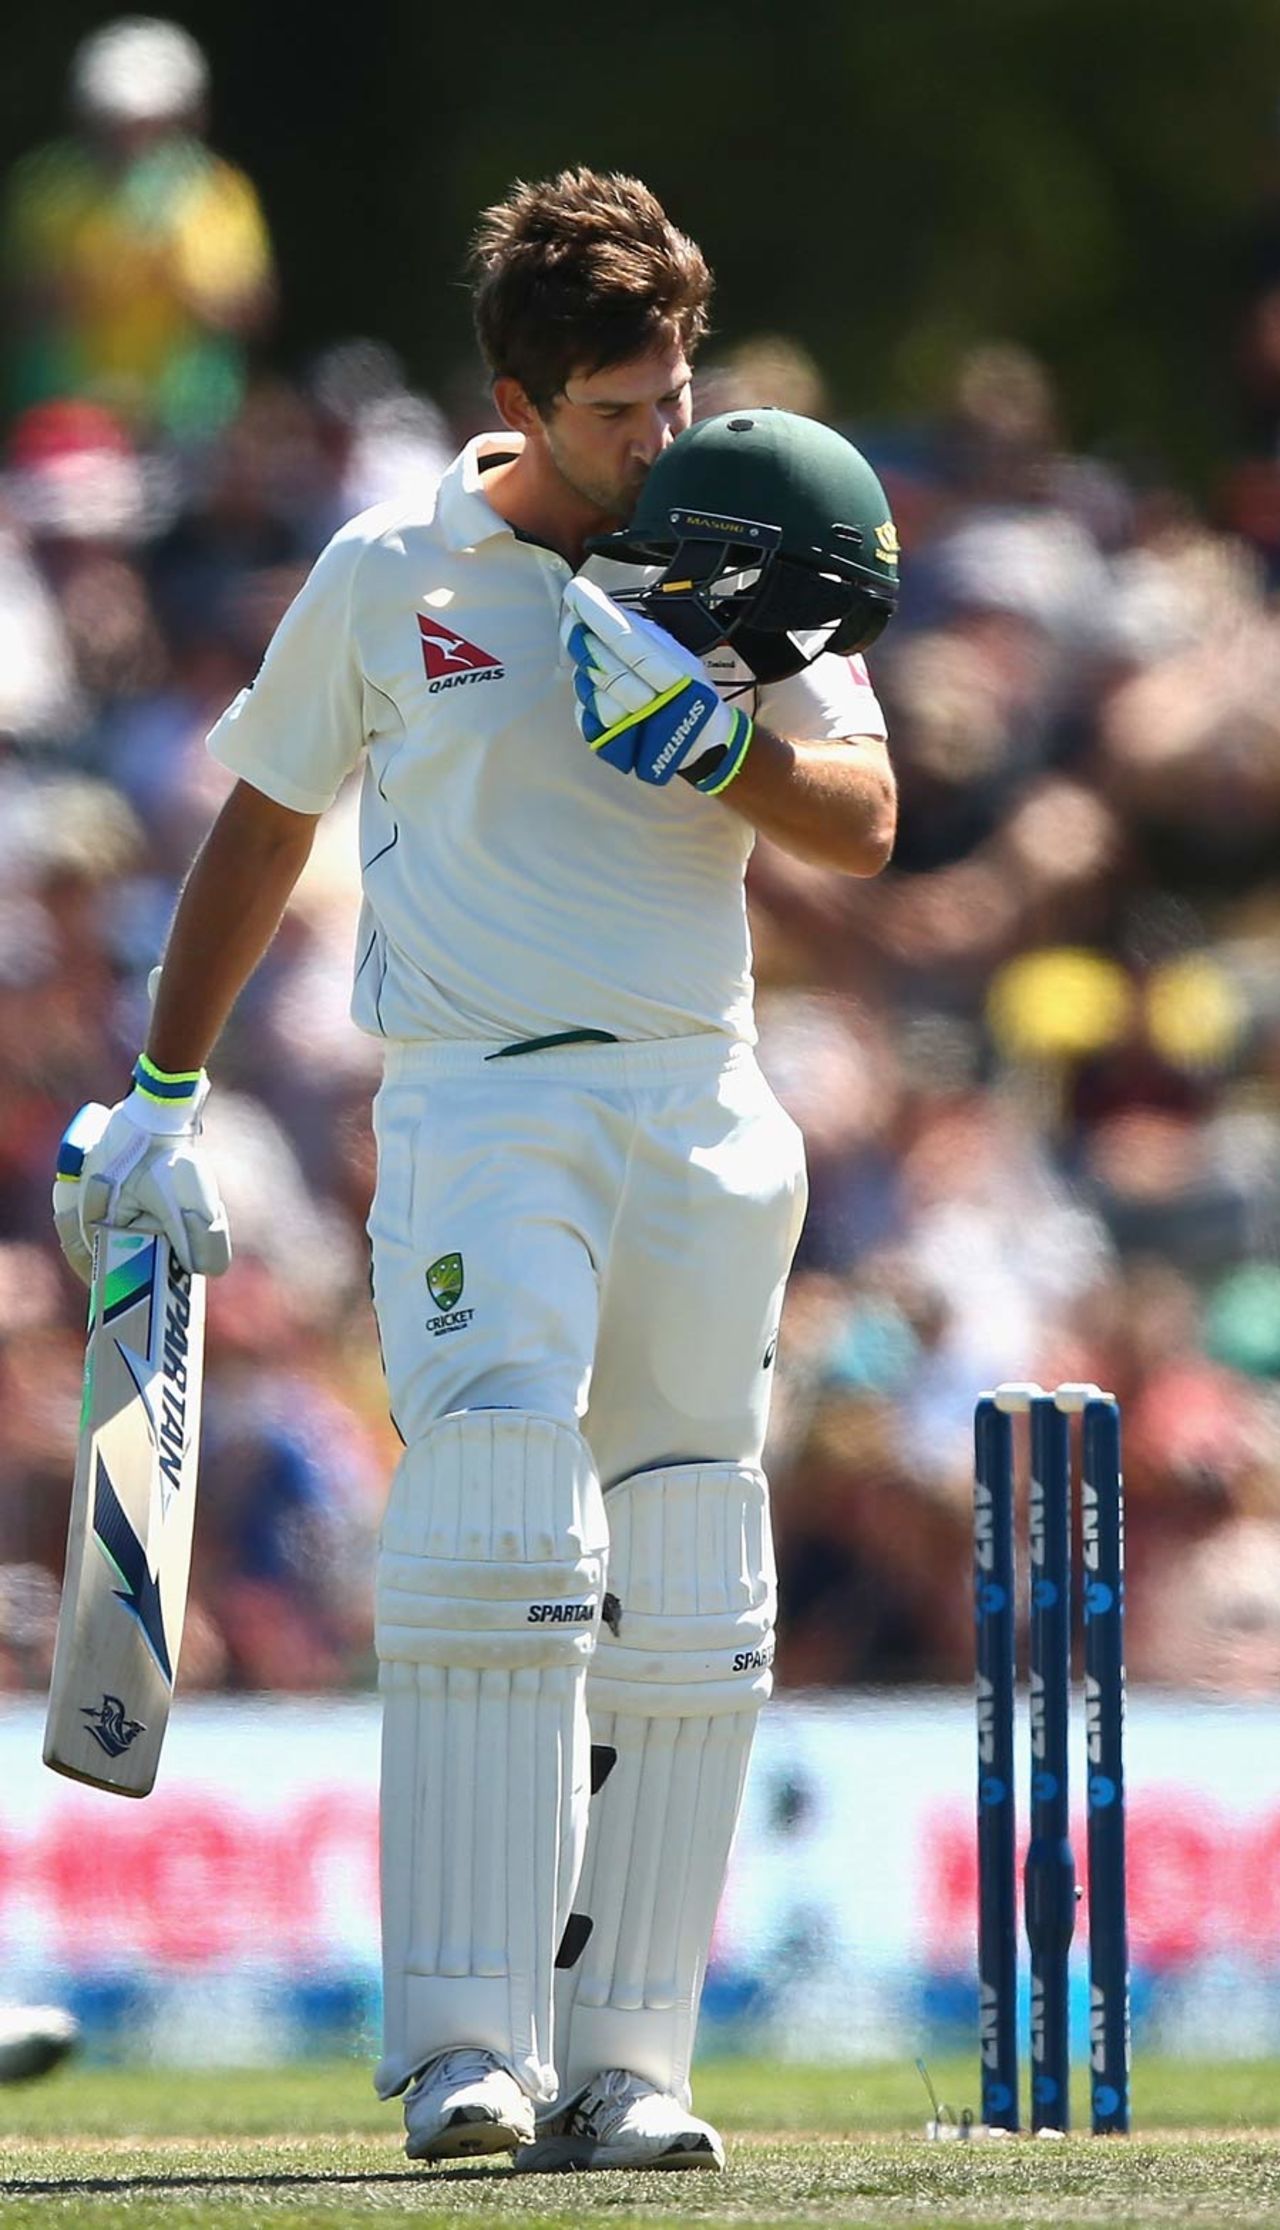 Joe Burns kisses the coat of arms after scoring his third Test hundred, New Zealand v Australia, 2nd Test, Christchurch, 2nd day, February 21, 2016